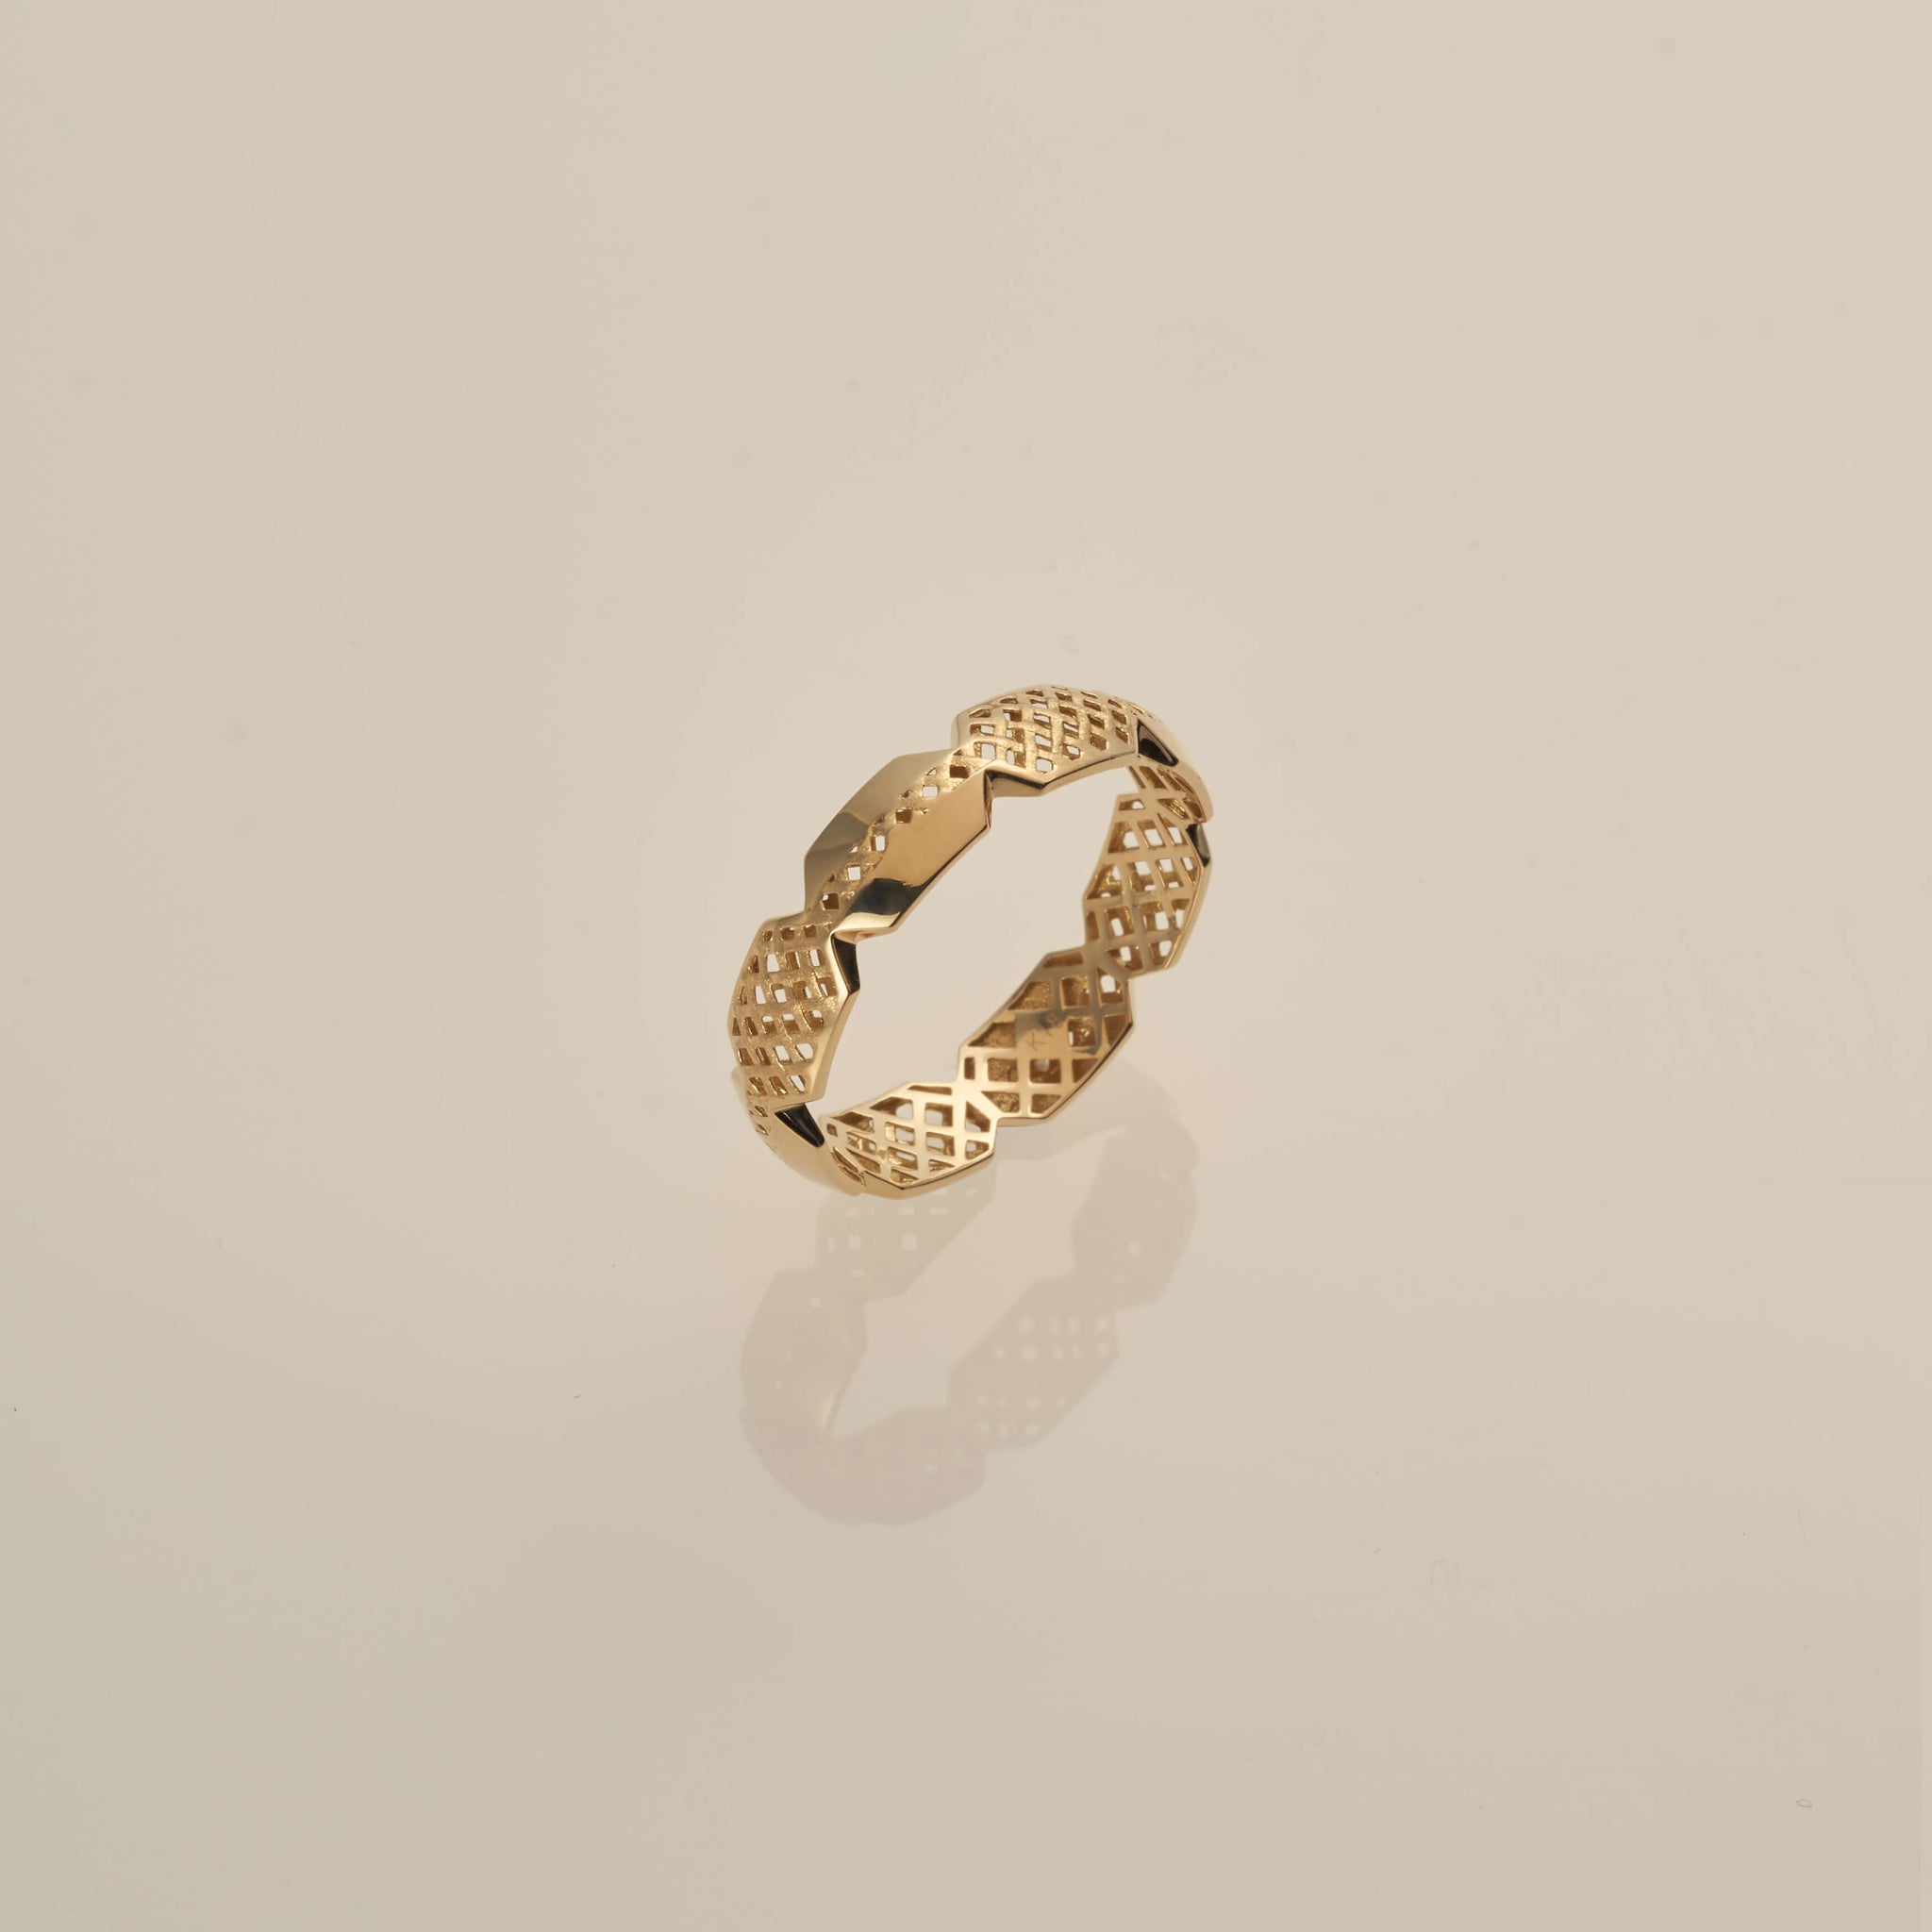 X bamboo stacking ring C<br>クロス バンブー スタッキング リング C